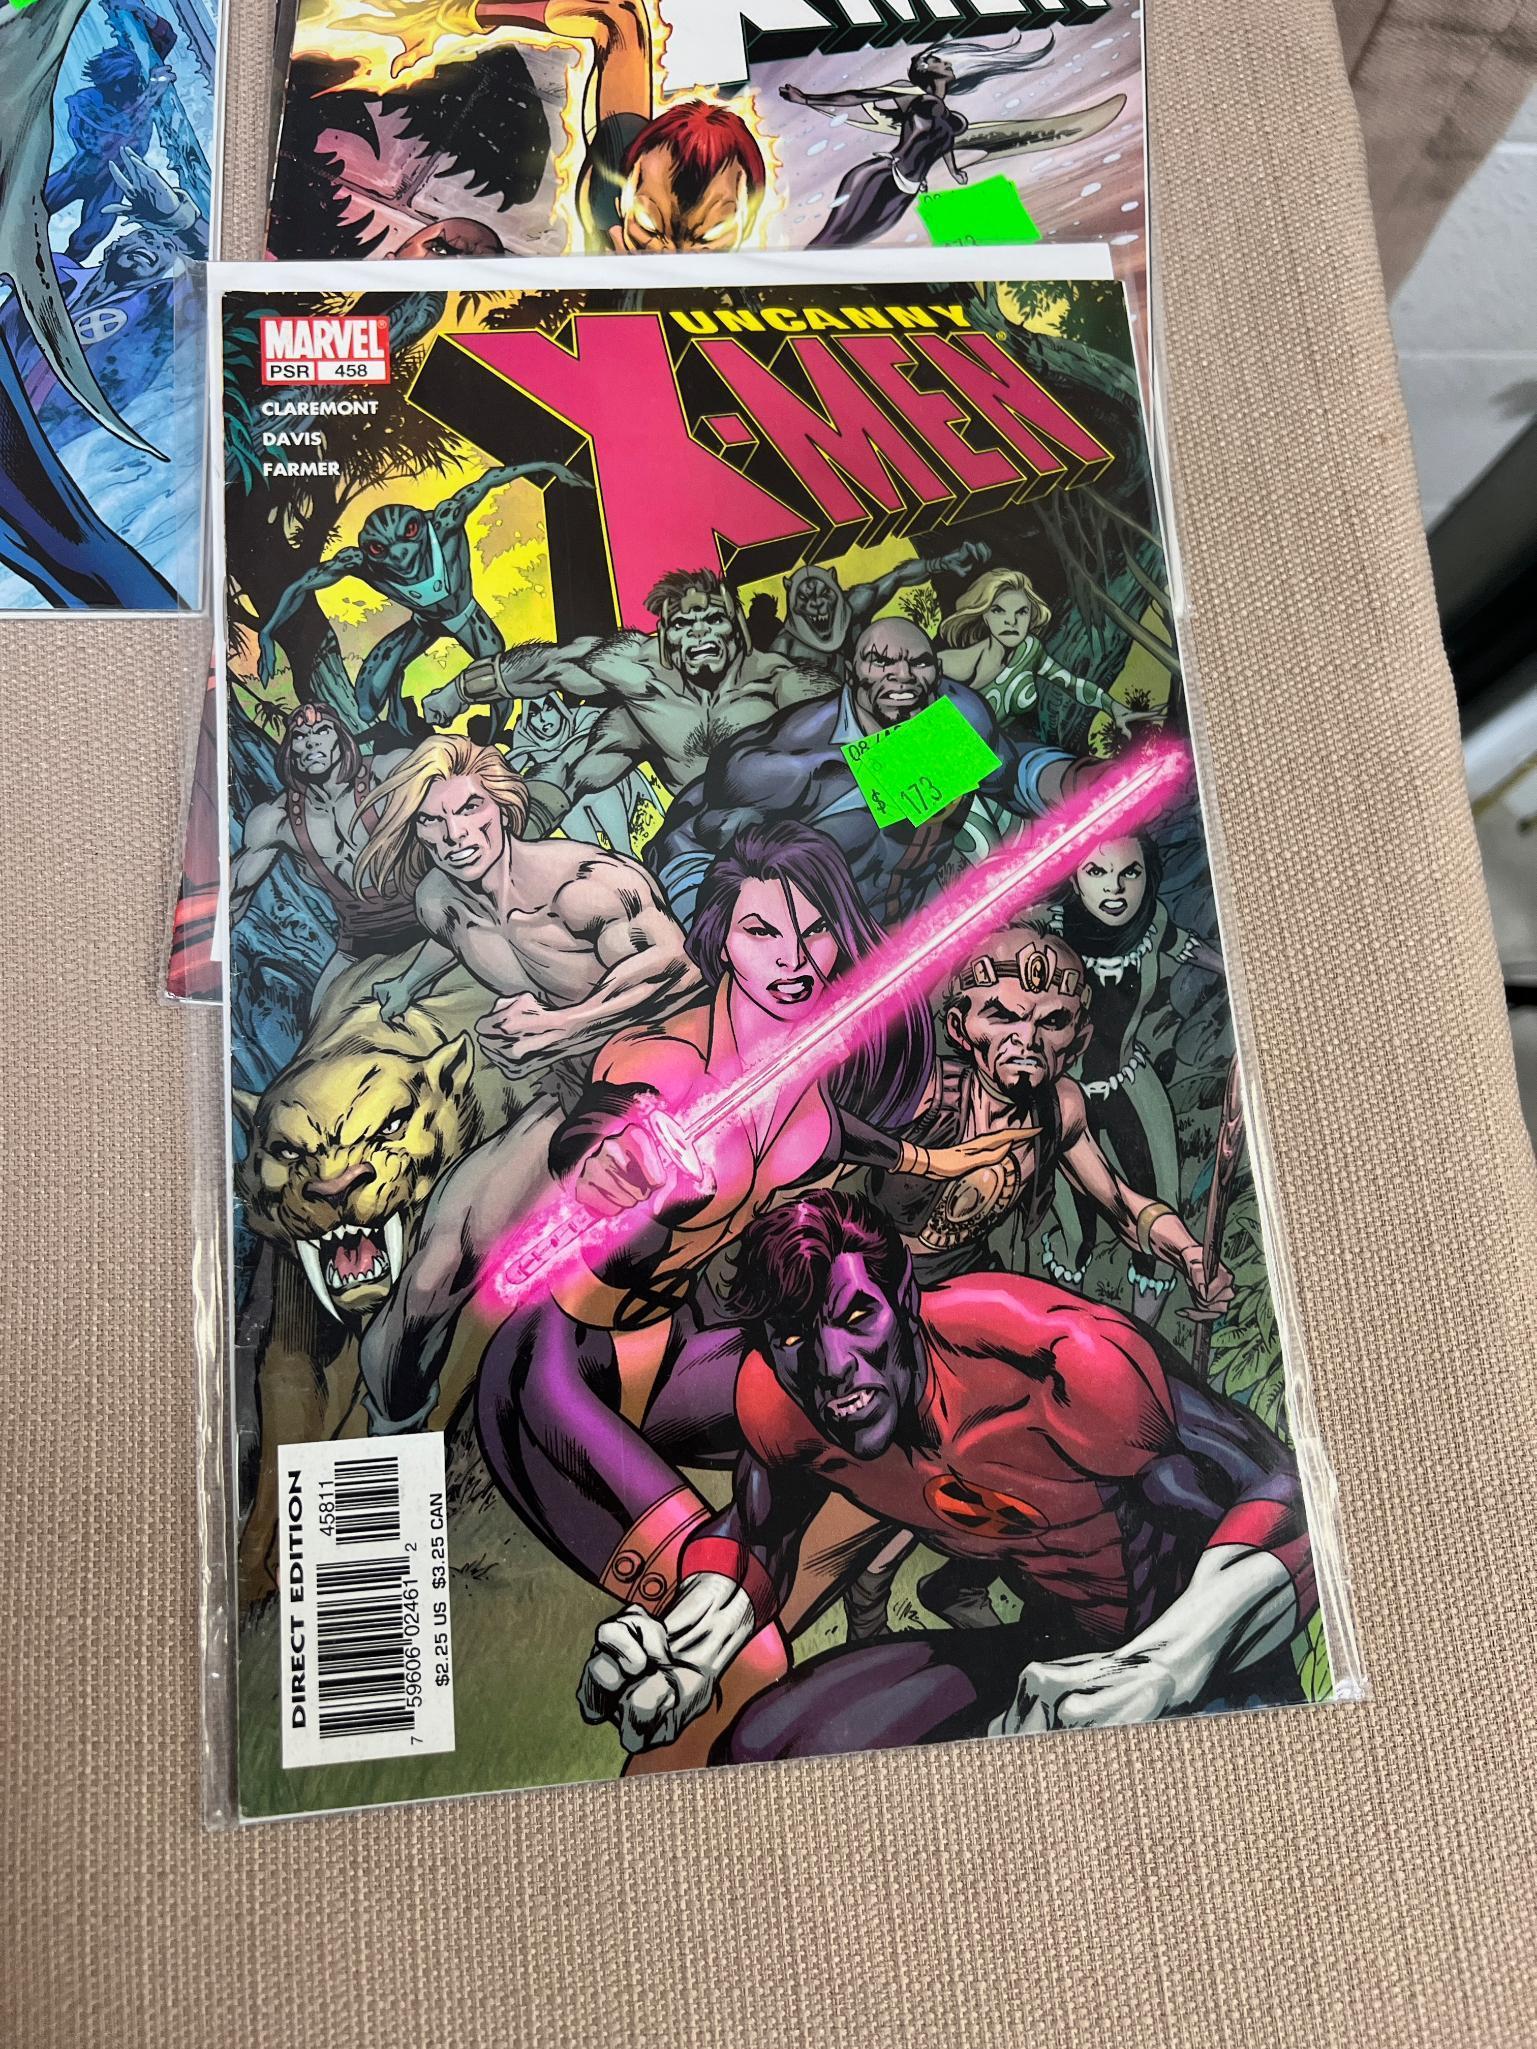 20+ Uncanny X-Men and related Comic Books issues 456-477, some dups, some gaps, see pics